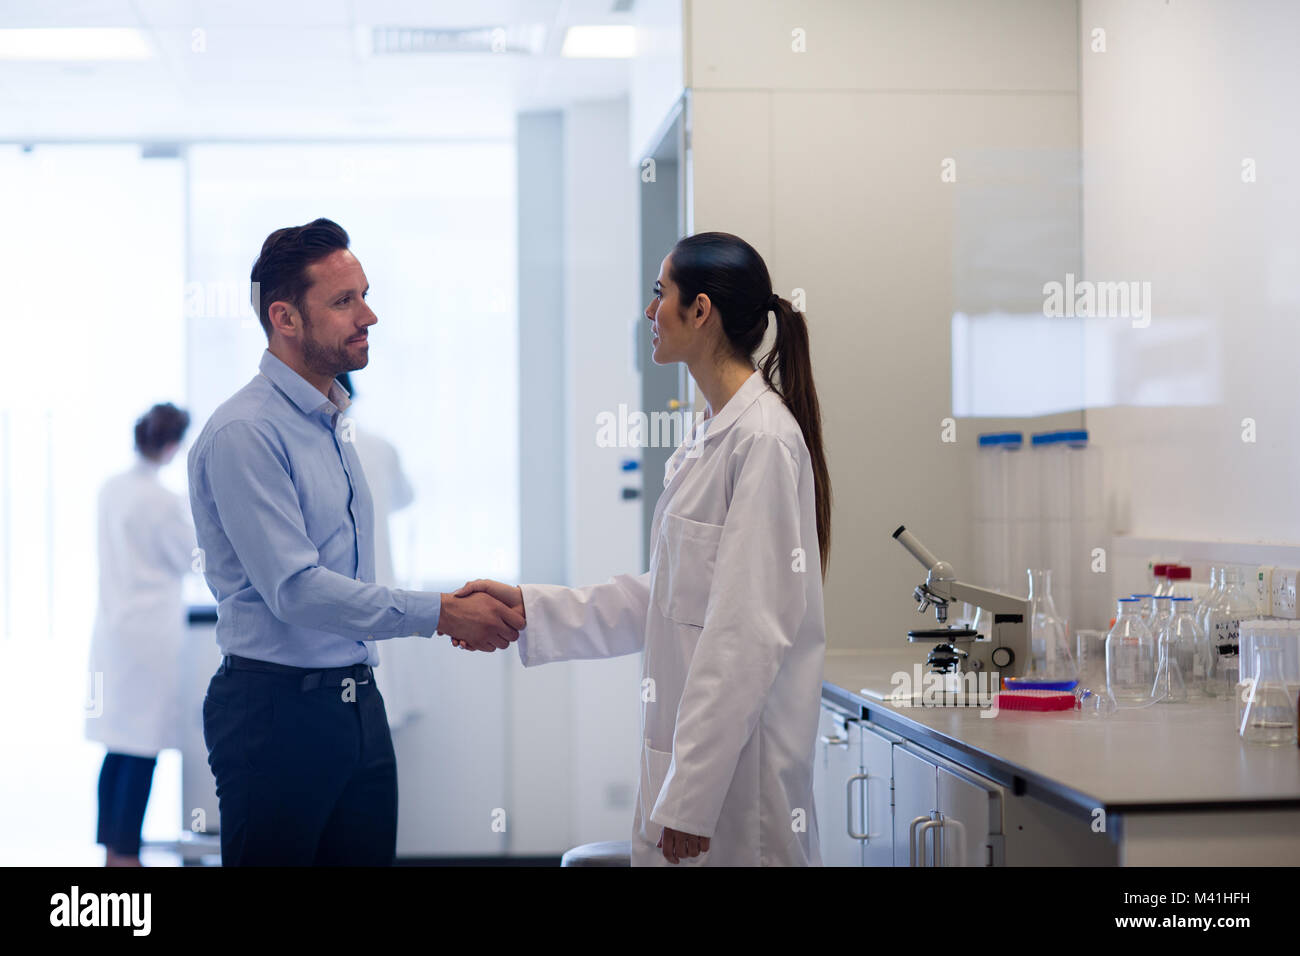 Female scientist shaking hands with pharmaceutical sales rep Banque D'Images